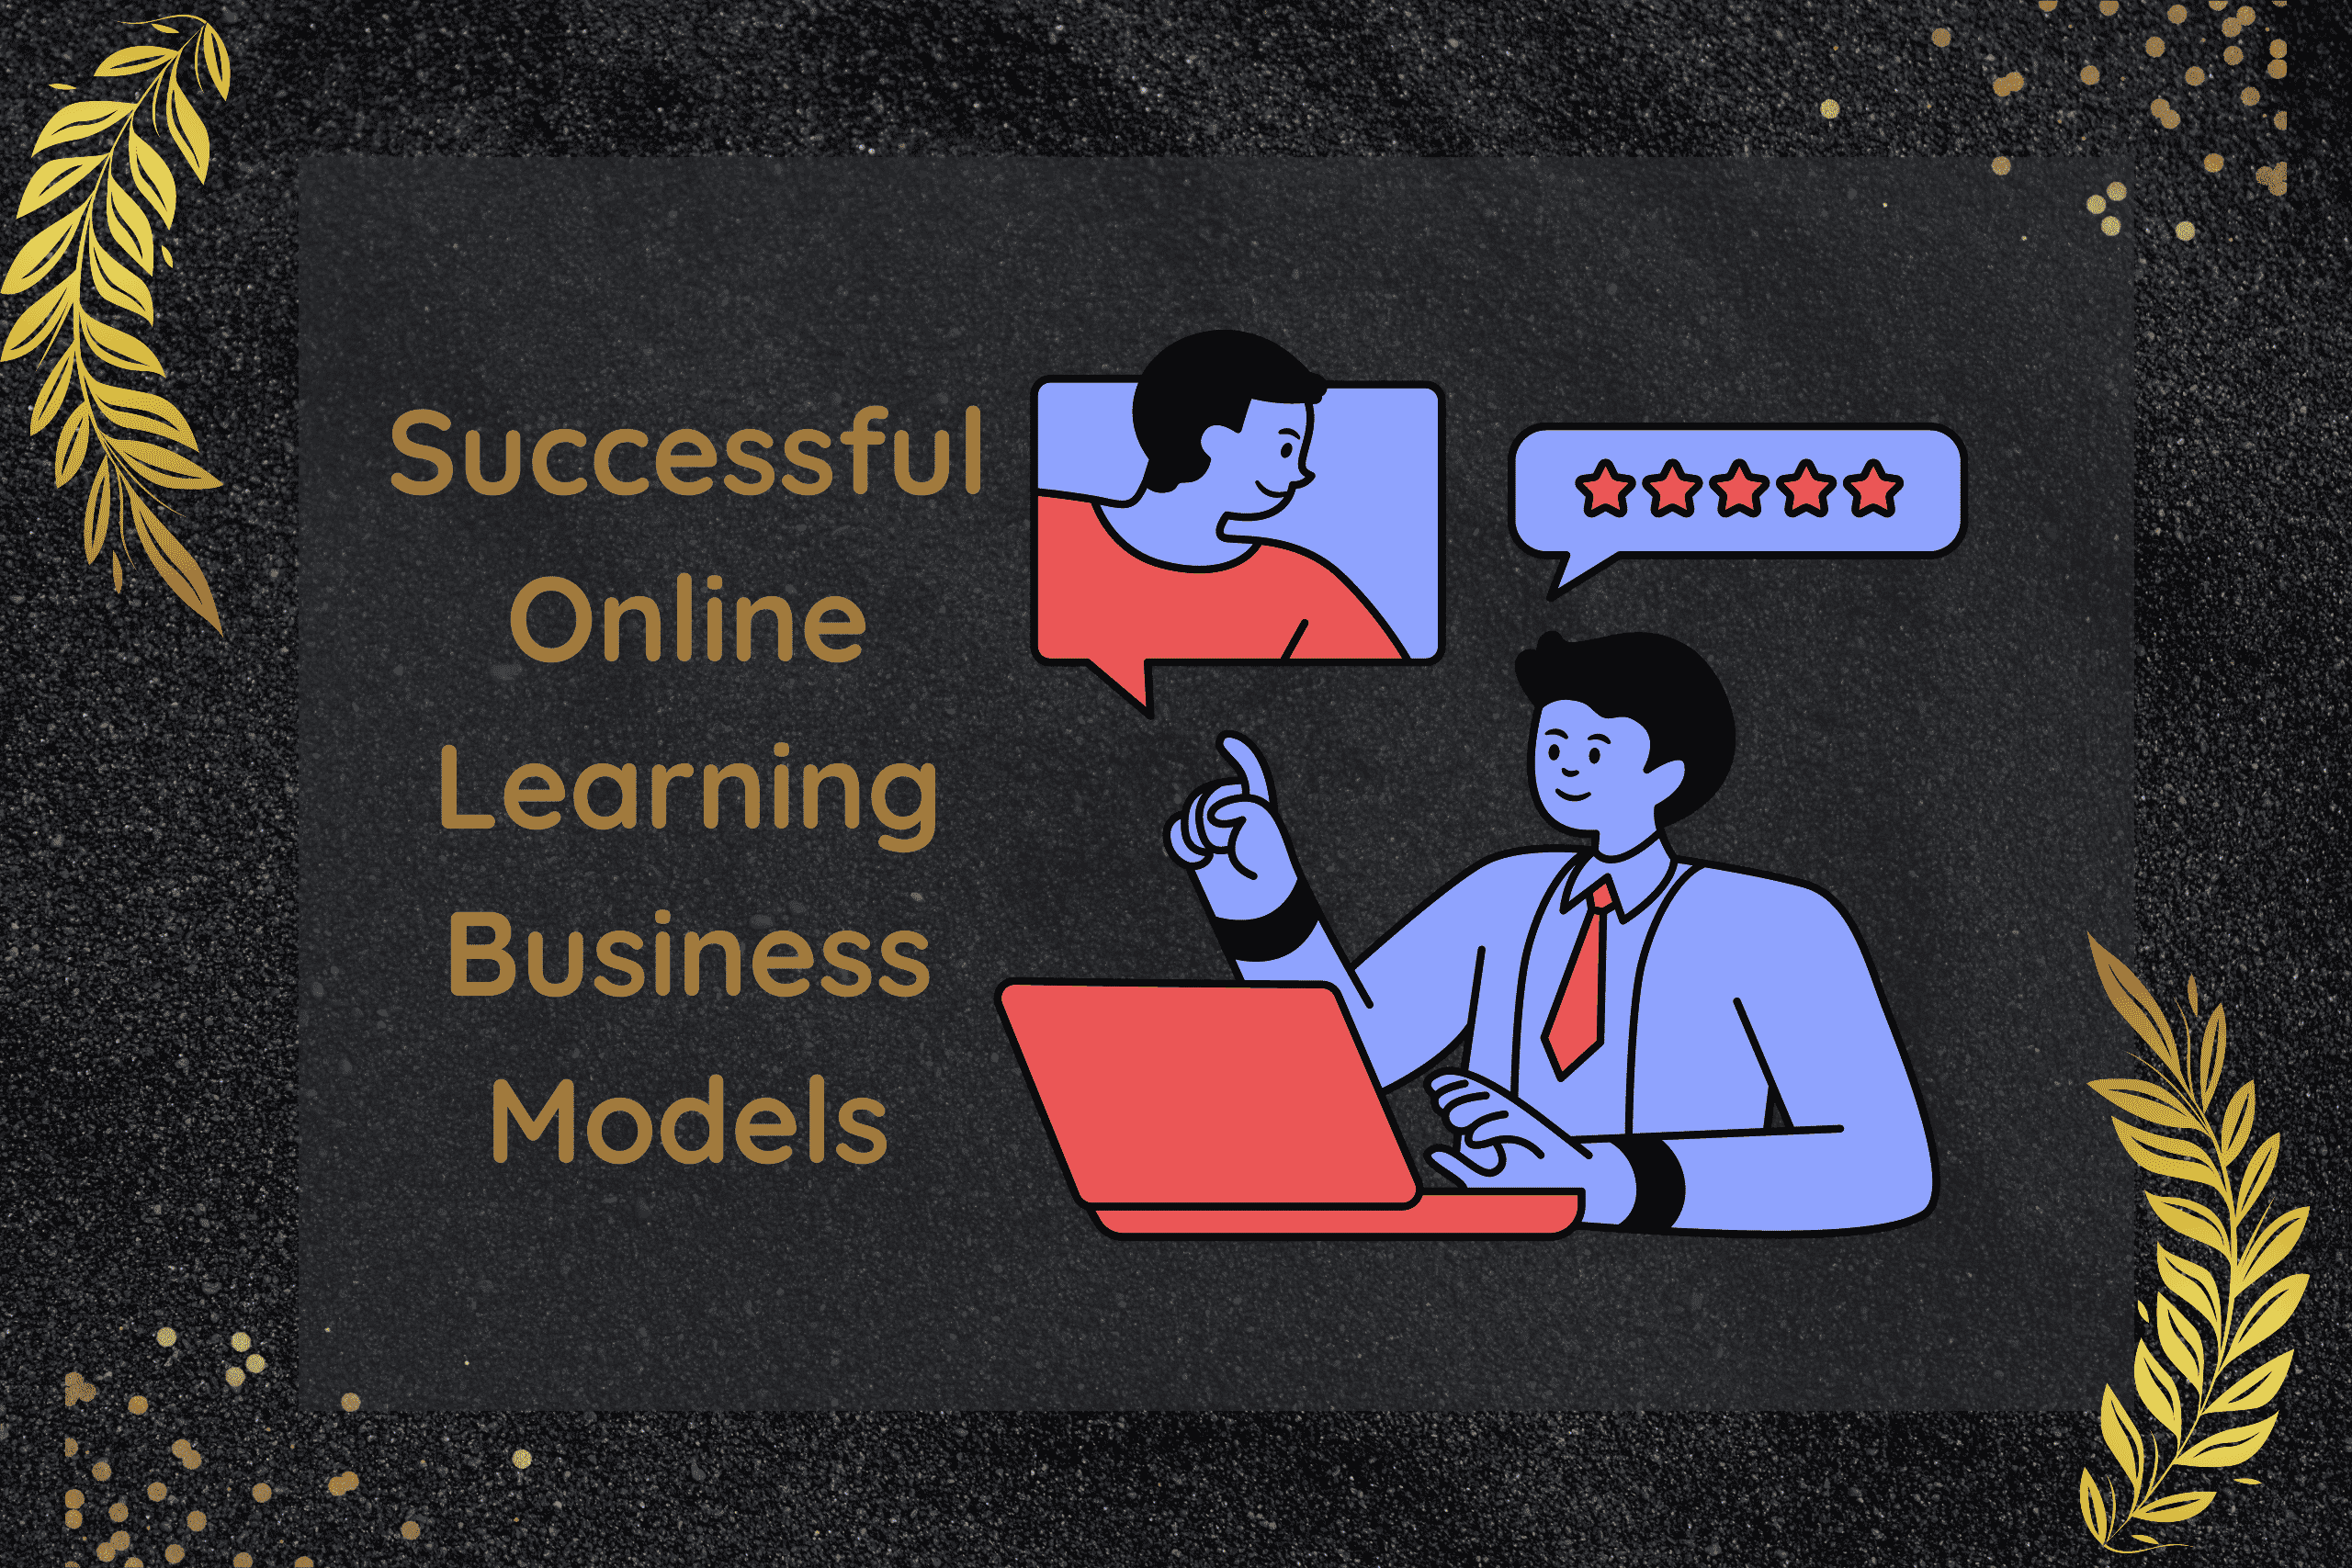 Successful Online Learning Business Models